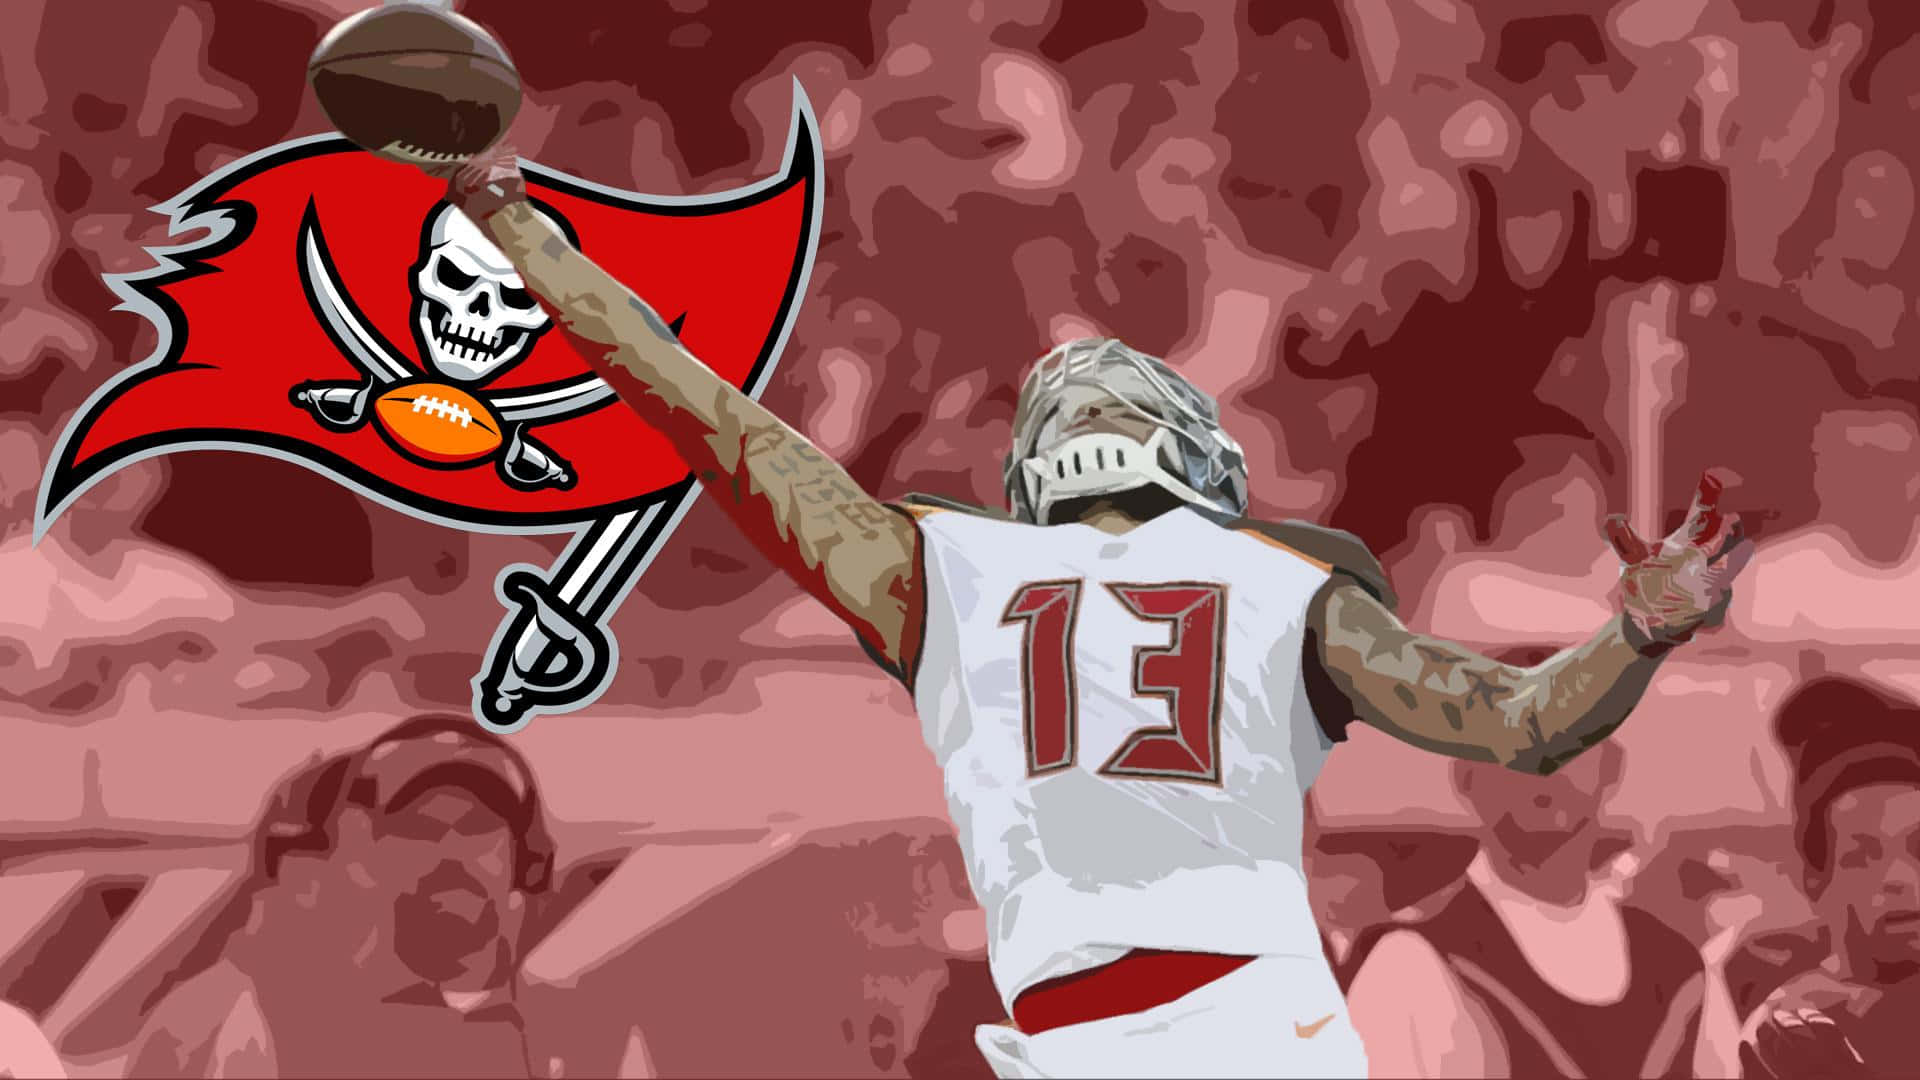 Tampa Bay Buccaneers wide receiver Mike Evans makes a spectacular athletic catch. Wallpaper